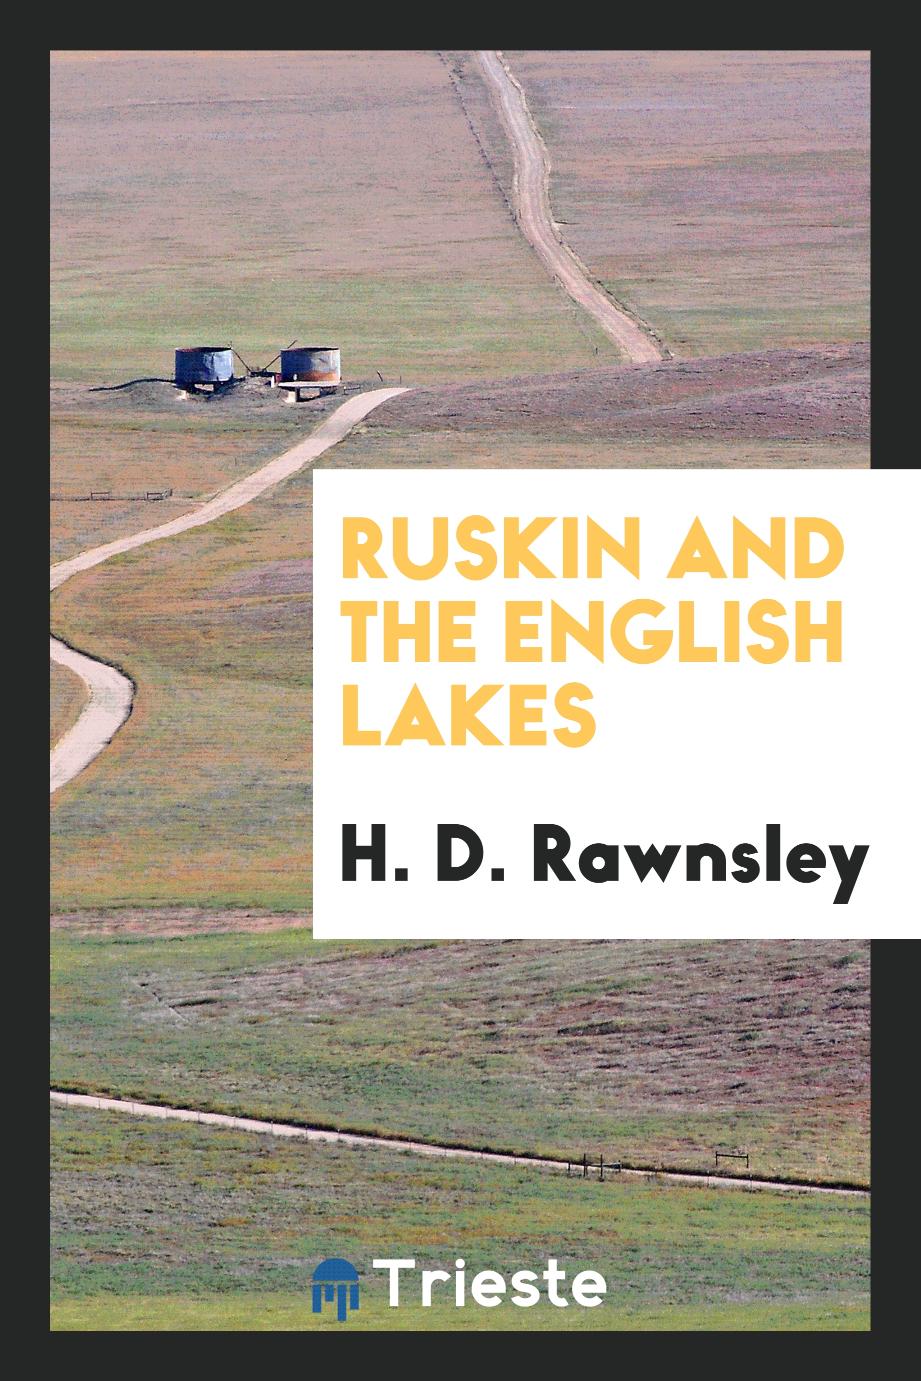 Ruskin and the English lakes